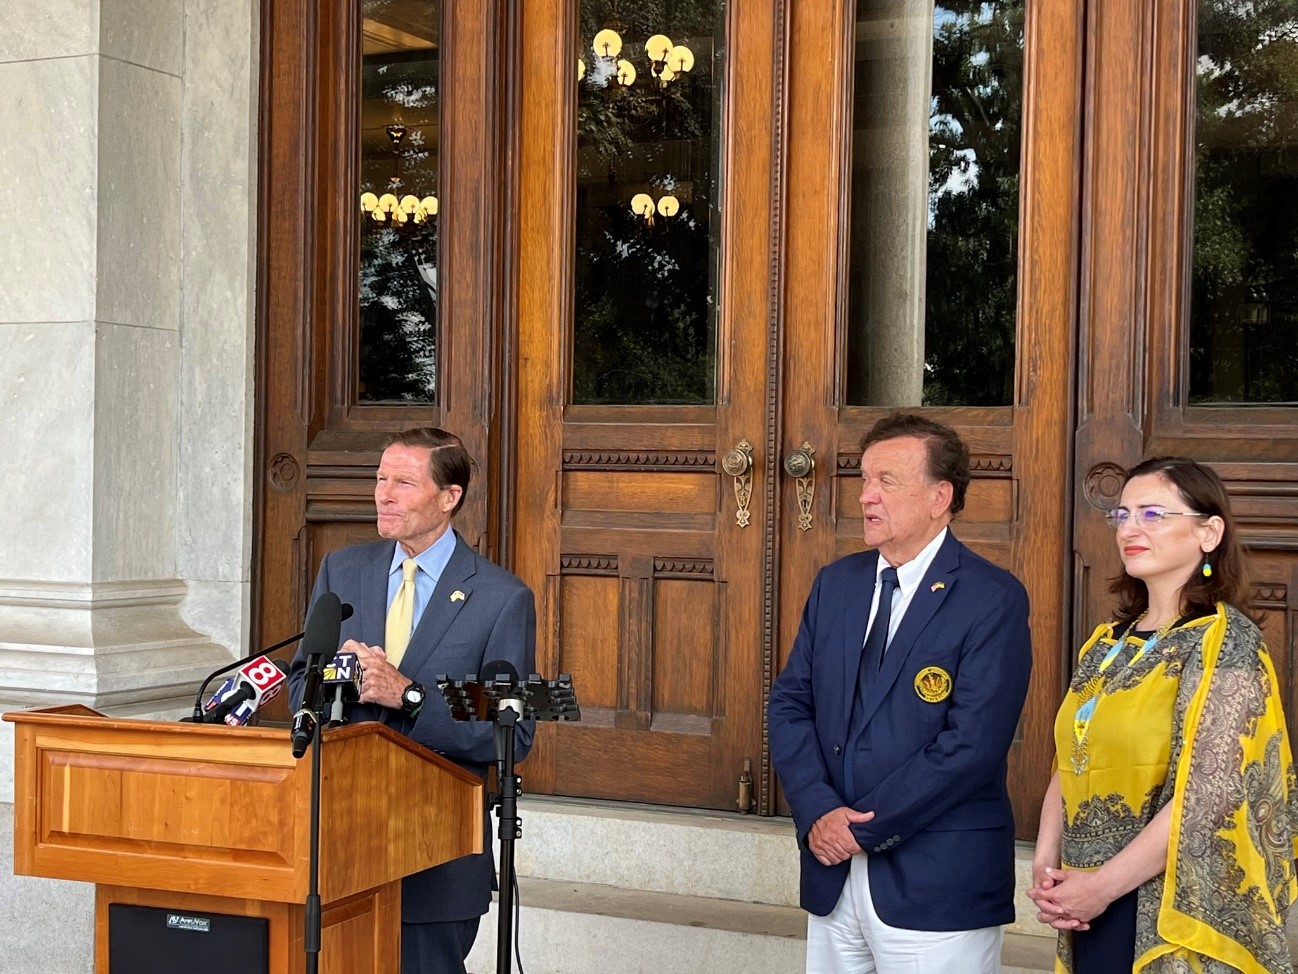 Following a meeting with President Volodymyr Zelenskyy in Kyiv last week, U.S. Senator Richard Blumenthal (D-CT) called for more weapons, military resources, and humanitarian aid to Ukraine.